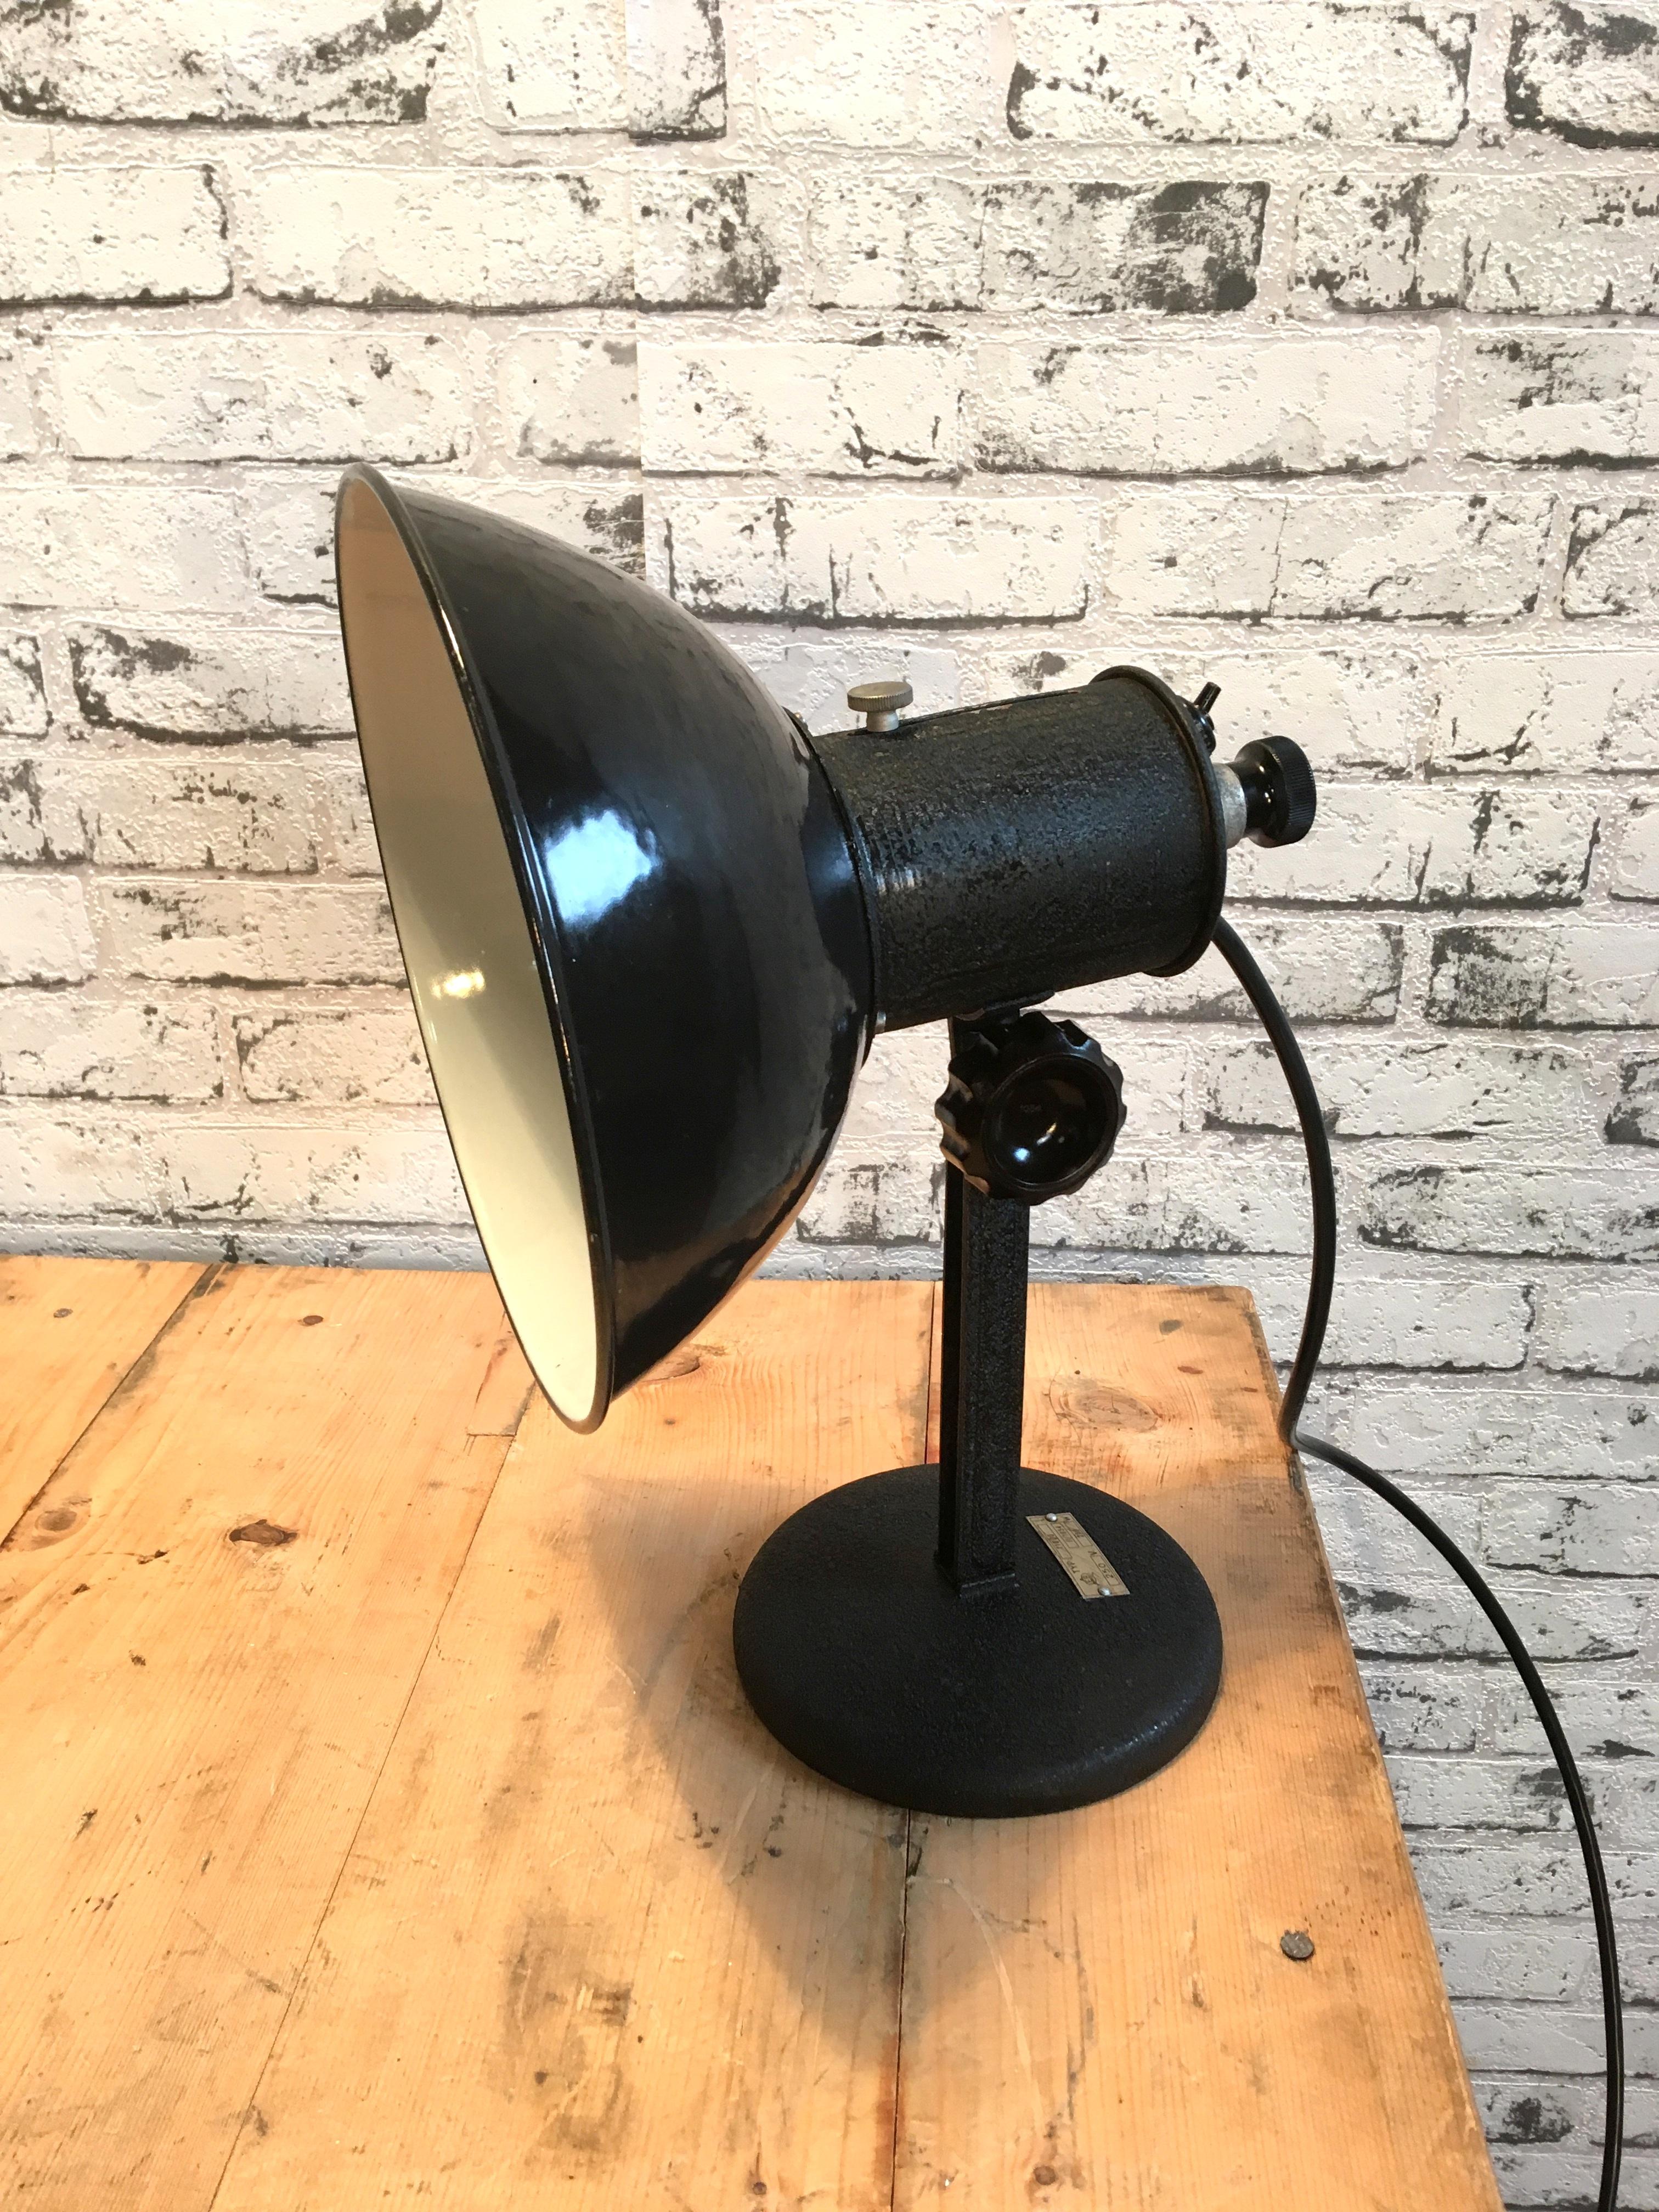 Industrial table lamp from former Czechoslovakia made during the 1950s. Black enamel shade, white interior. Porcelain socket for E 27 lightbulbs, new wire. Very good vintage condition. Fully functional.
 